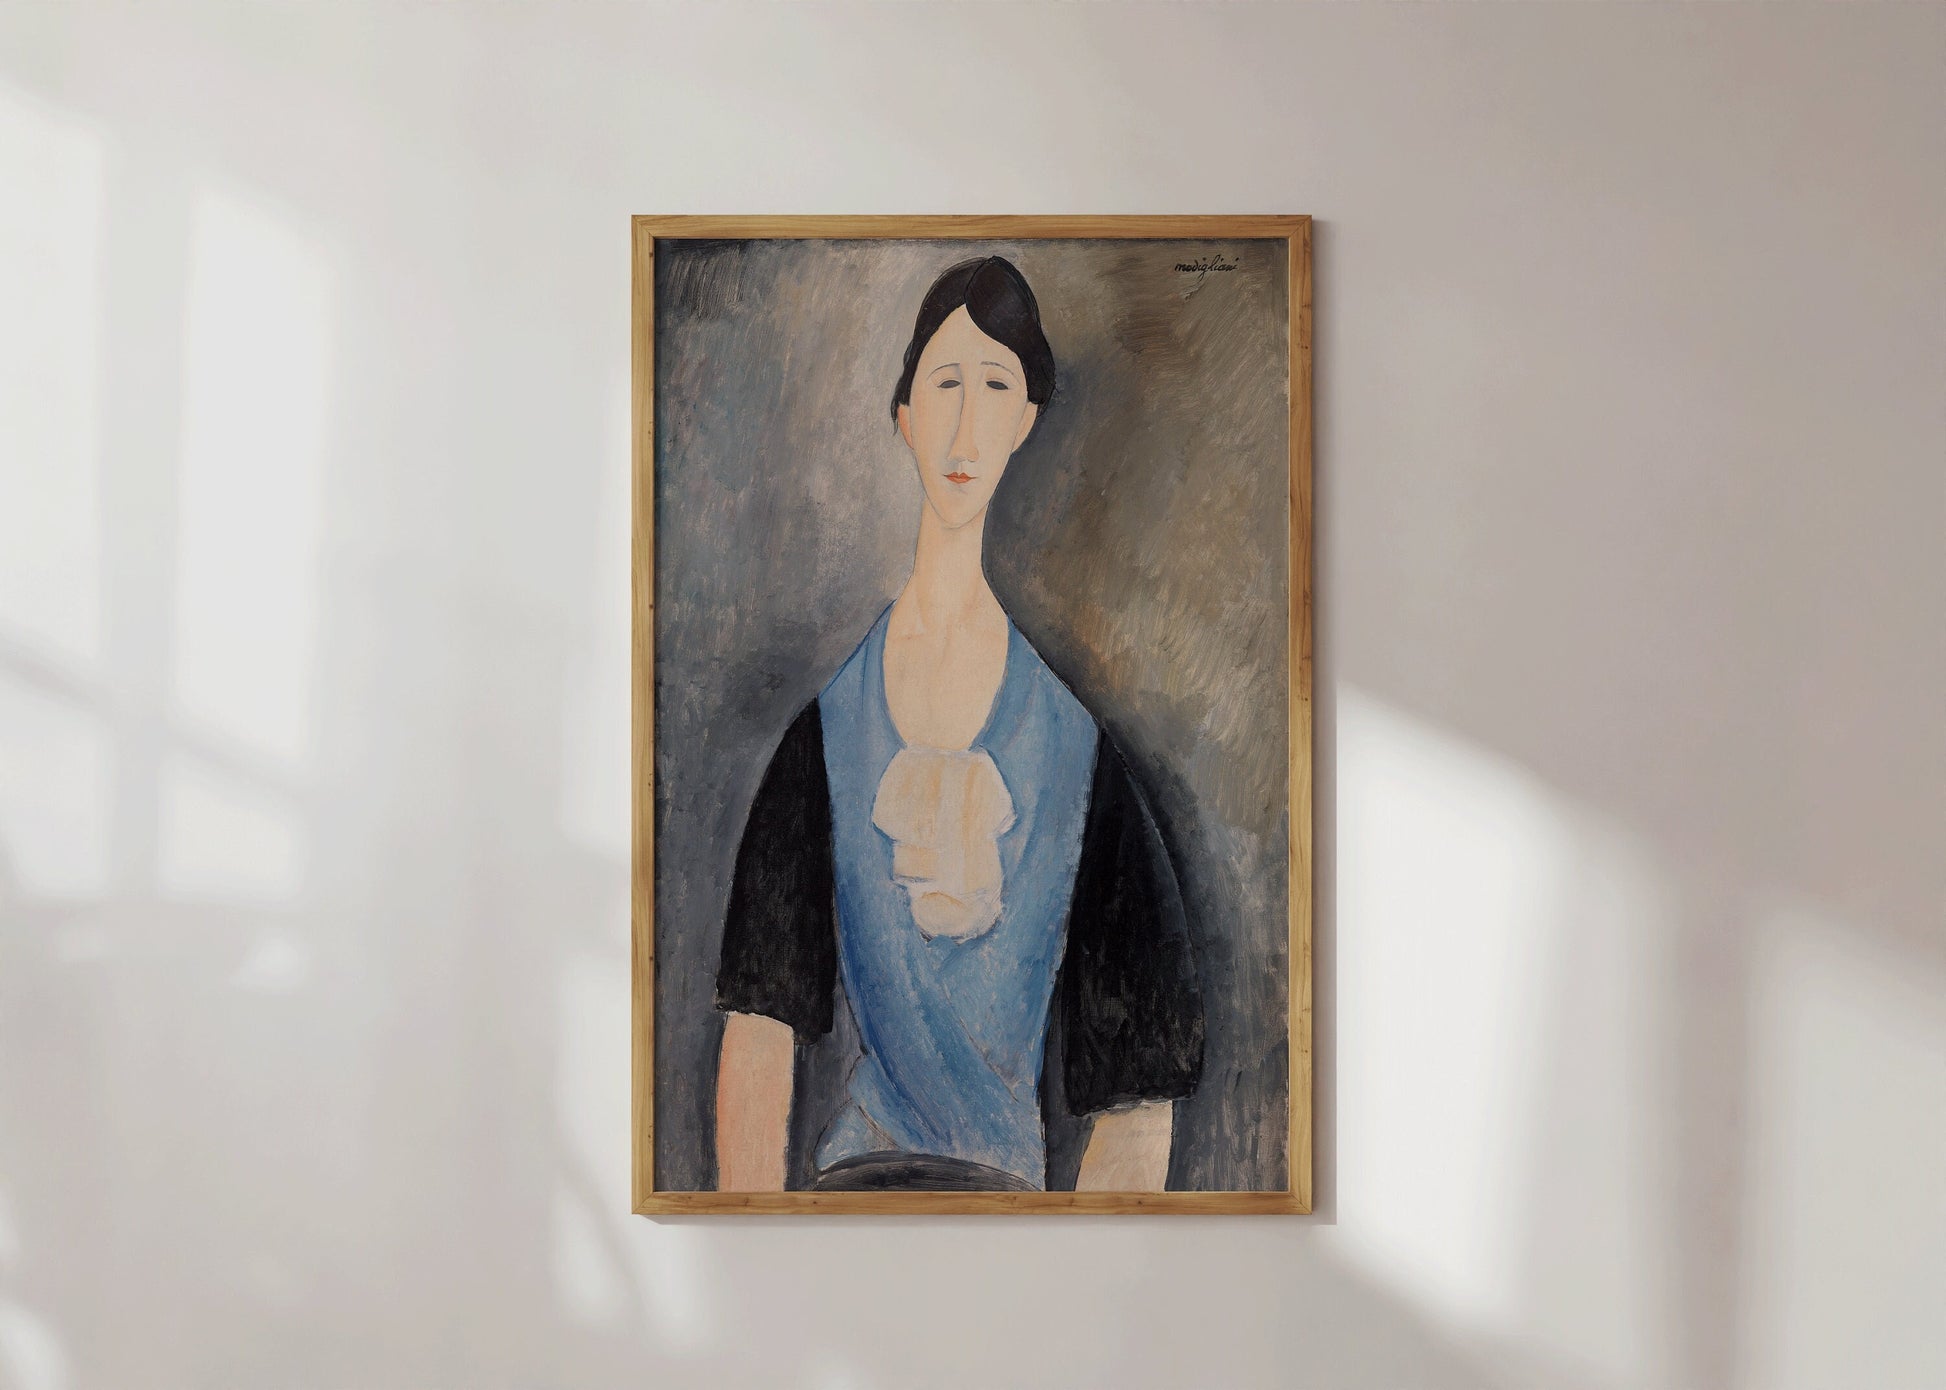 Ameodeo Modigliani Young Woman in Blue Fine Art Famous Iconic Painting Vintage Ready to hang Framed Home Office Decor Print Gift Idea